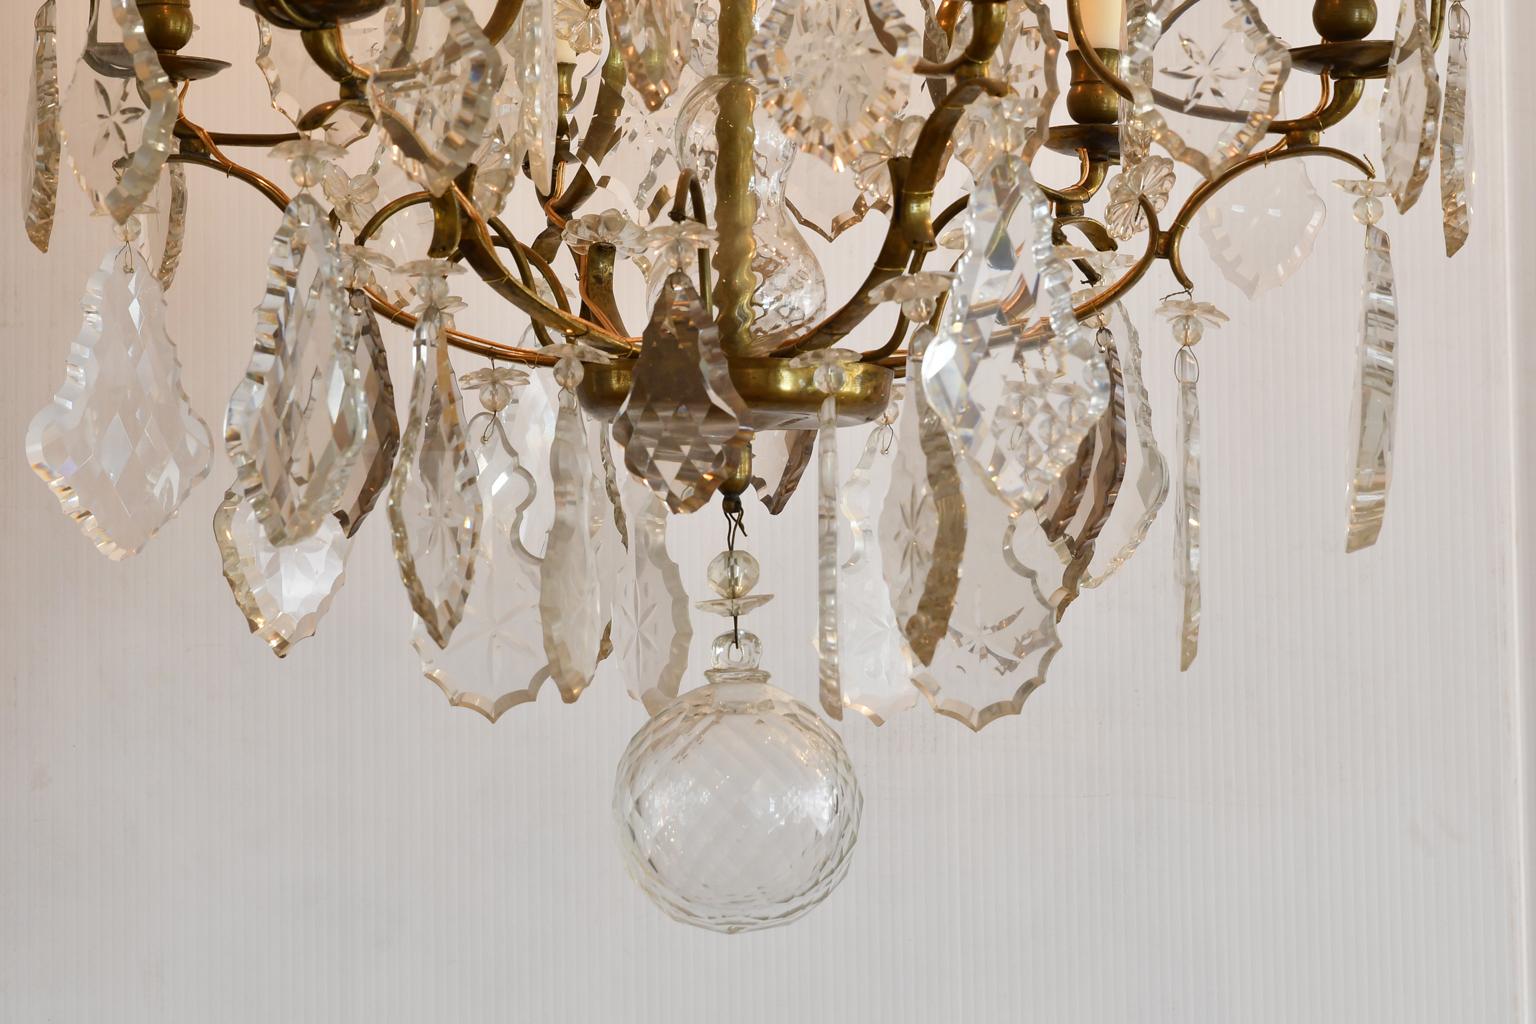 Swedish Antique Baroque-Style 6-Light Chandelier with Fine Cut & Beveled Crystal Prisms For Sale